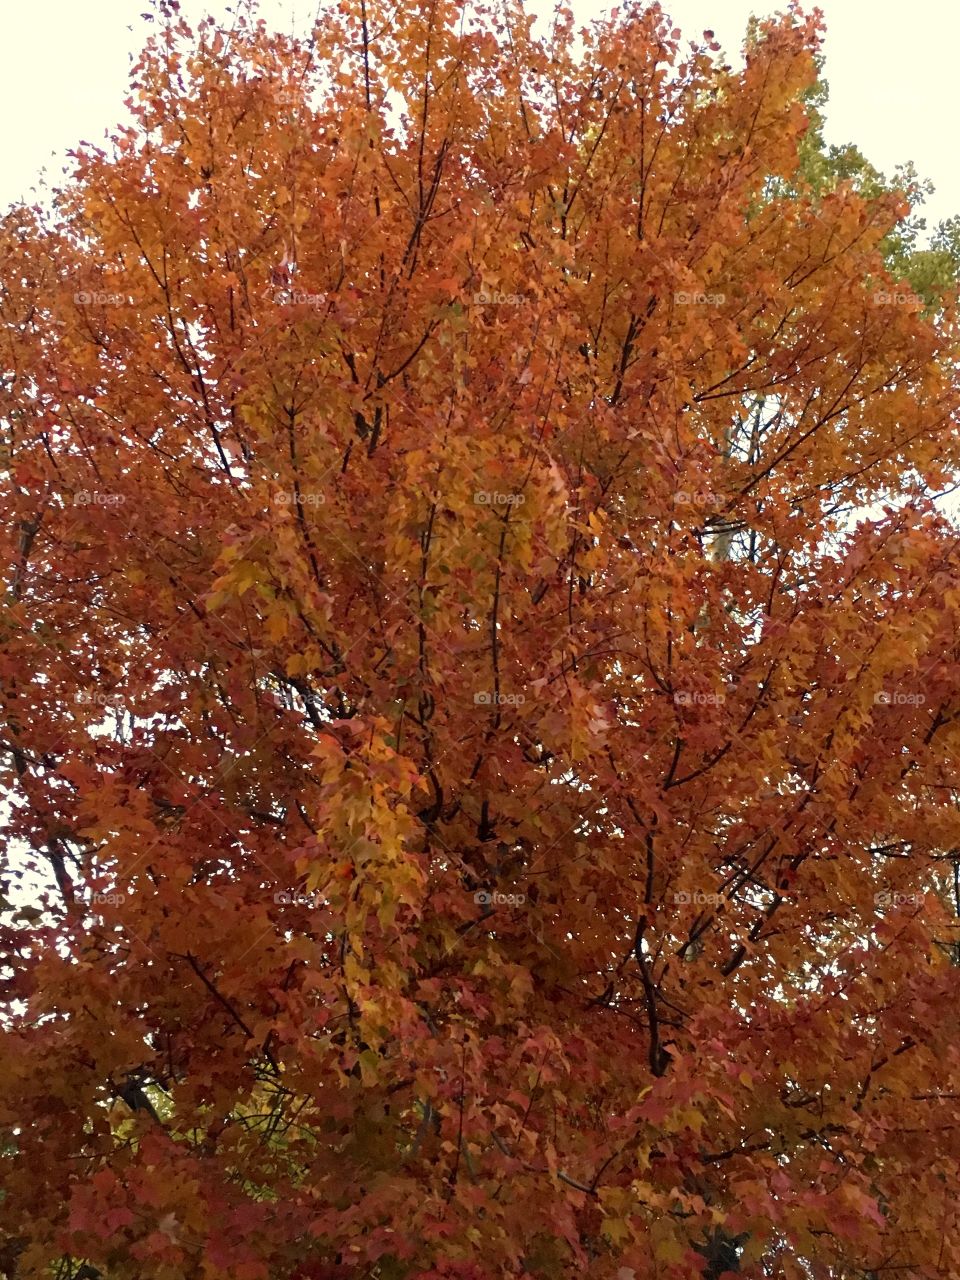 One of the maple trees in my yard